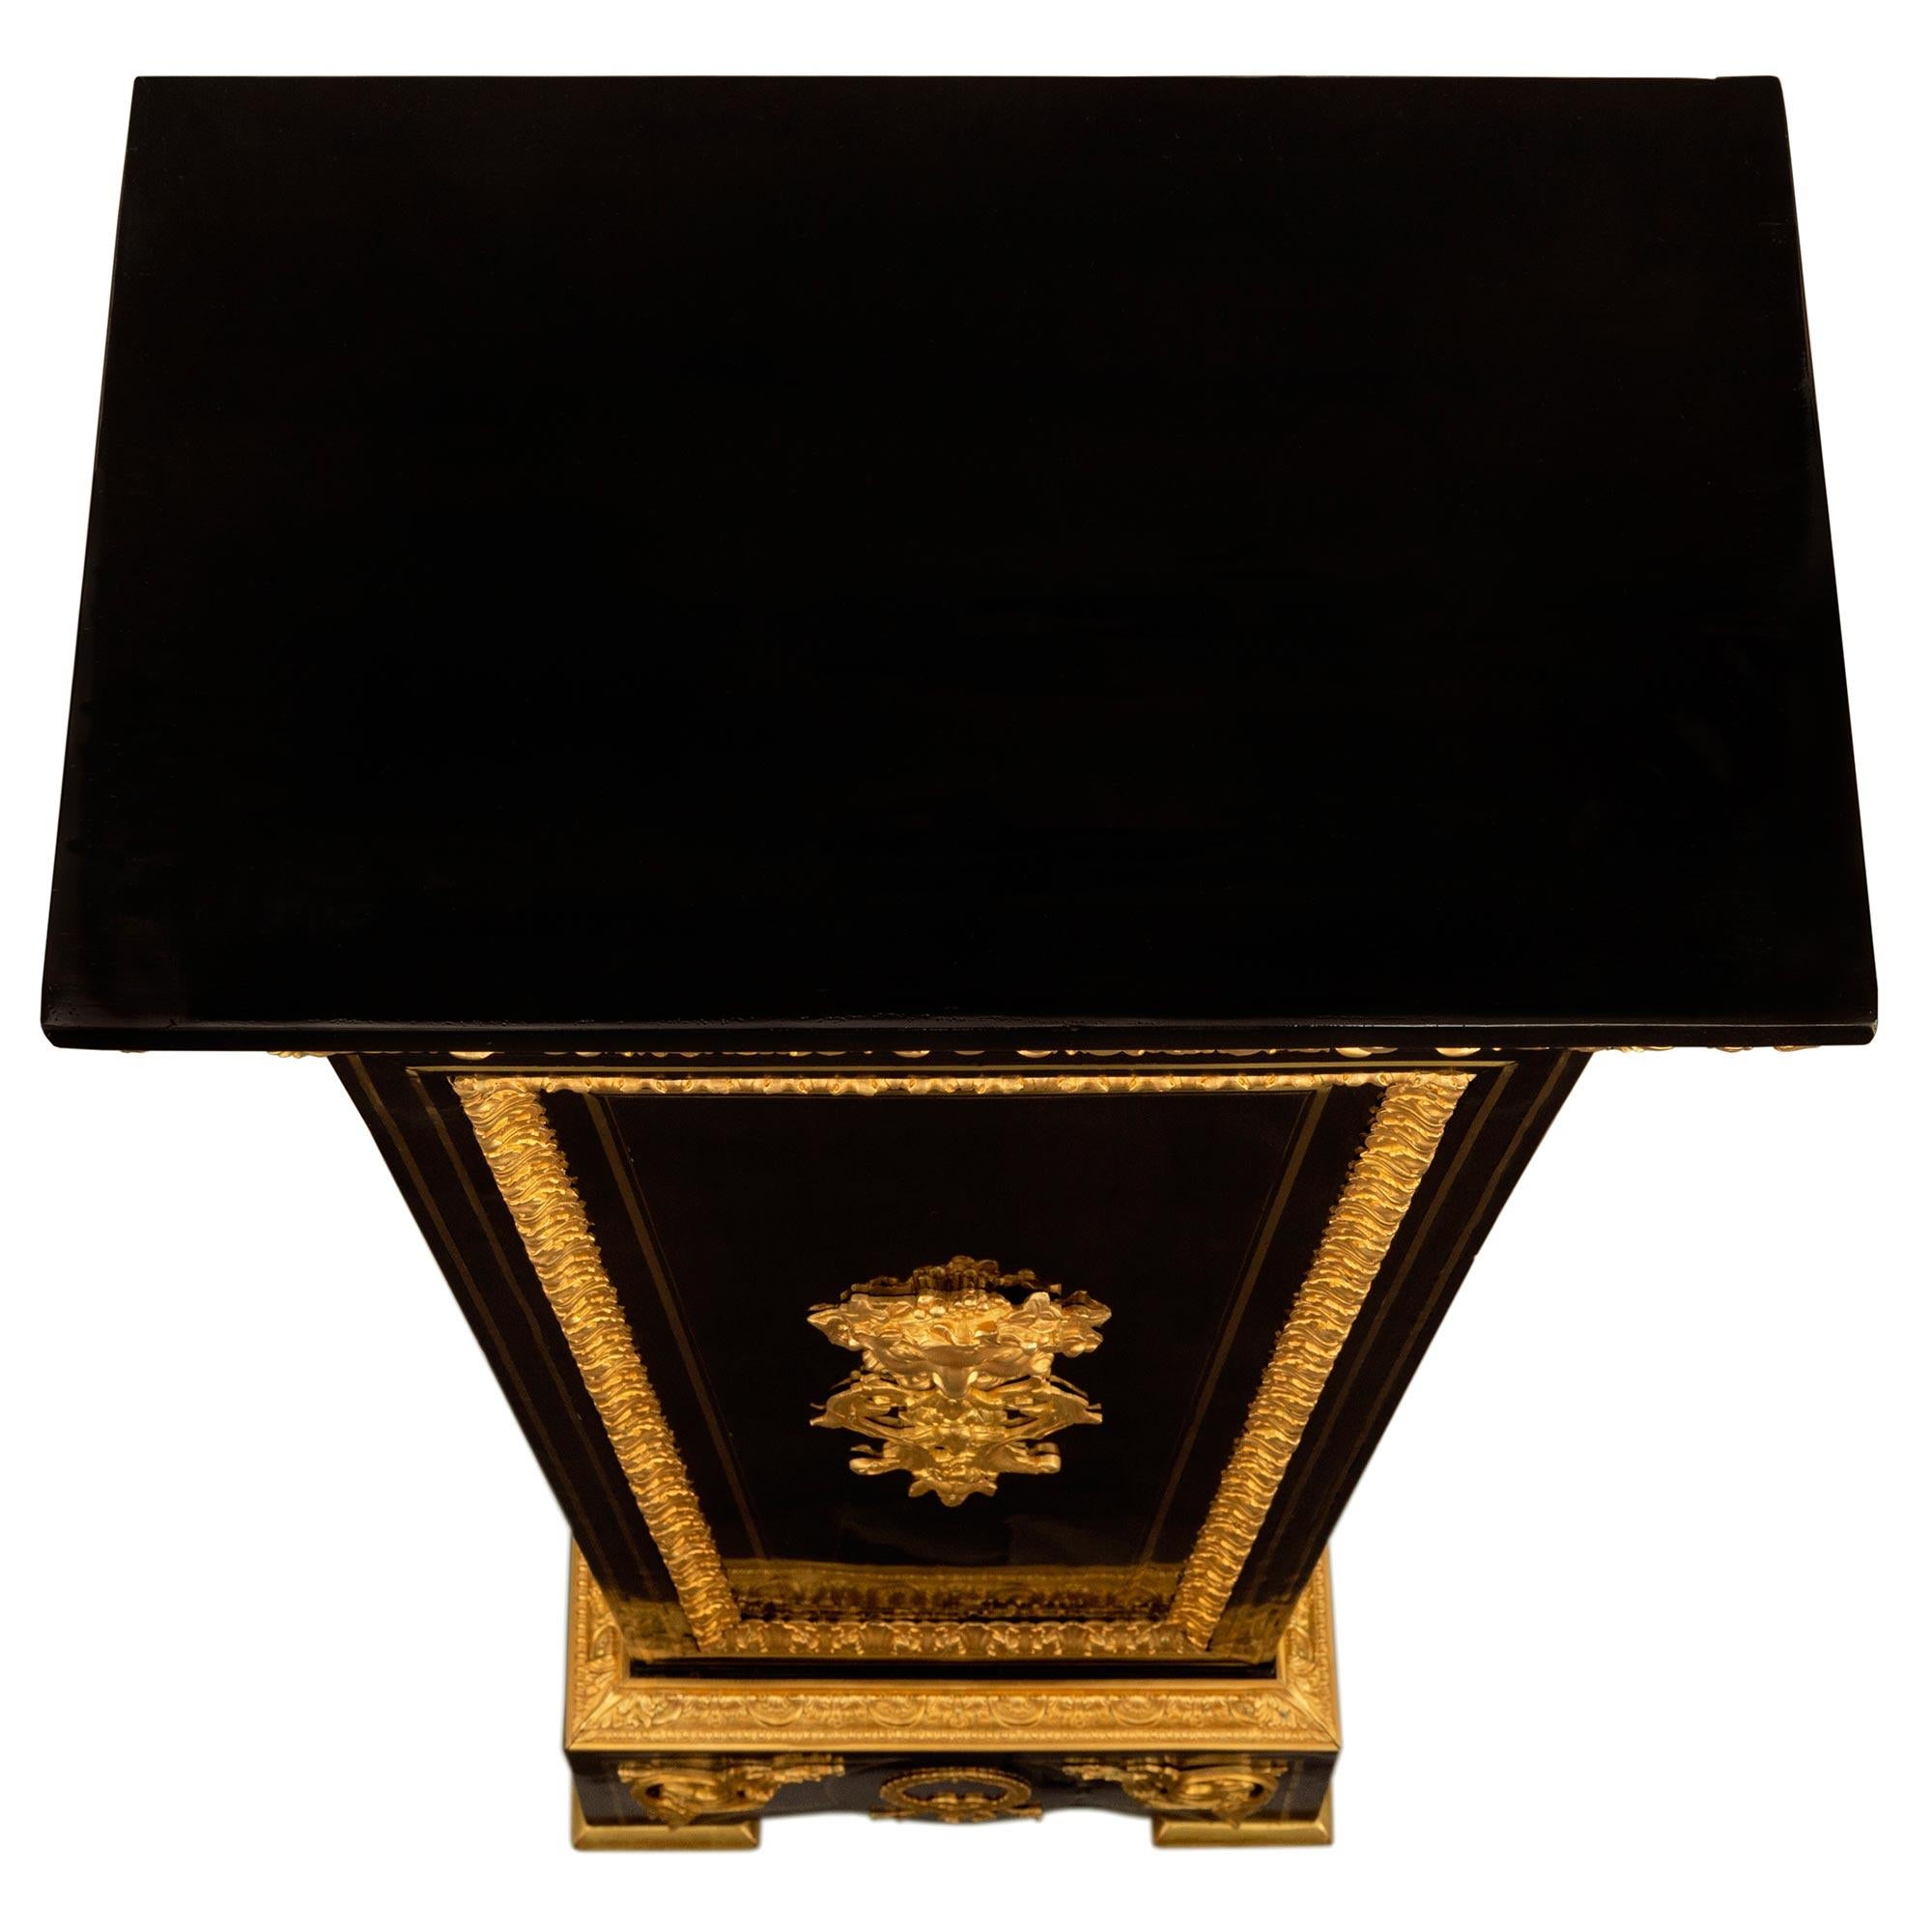 An exceptional and very high quality pair of French 19th century Louis XIV st. Ebony, brass, giltwood and ormolu Boulle st. pedestals. Each pedestal is raised by fine giltwood feet below the rectangular base with an arched front and sides decorated